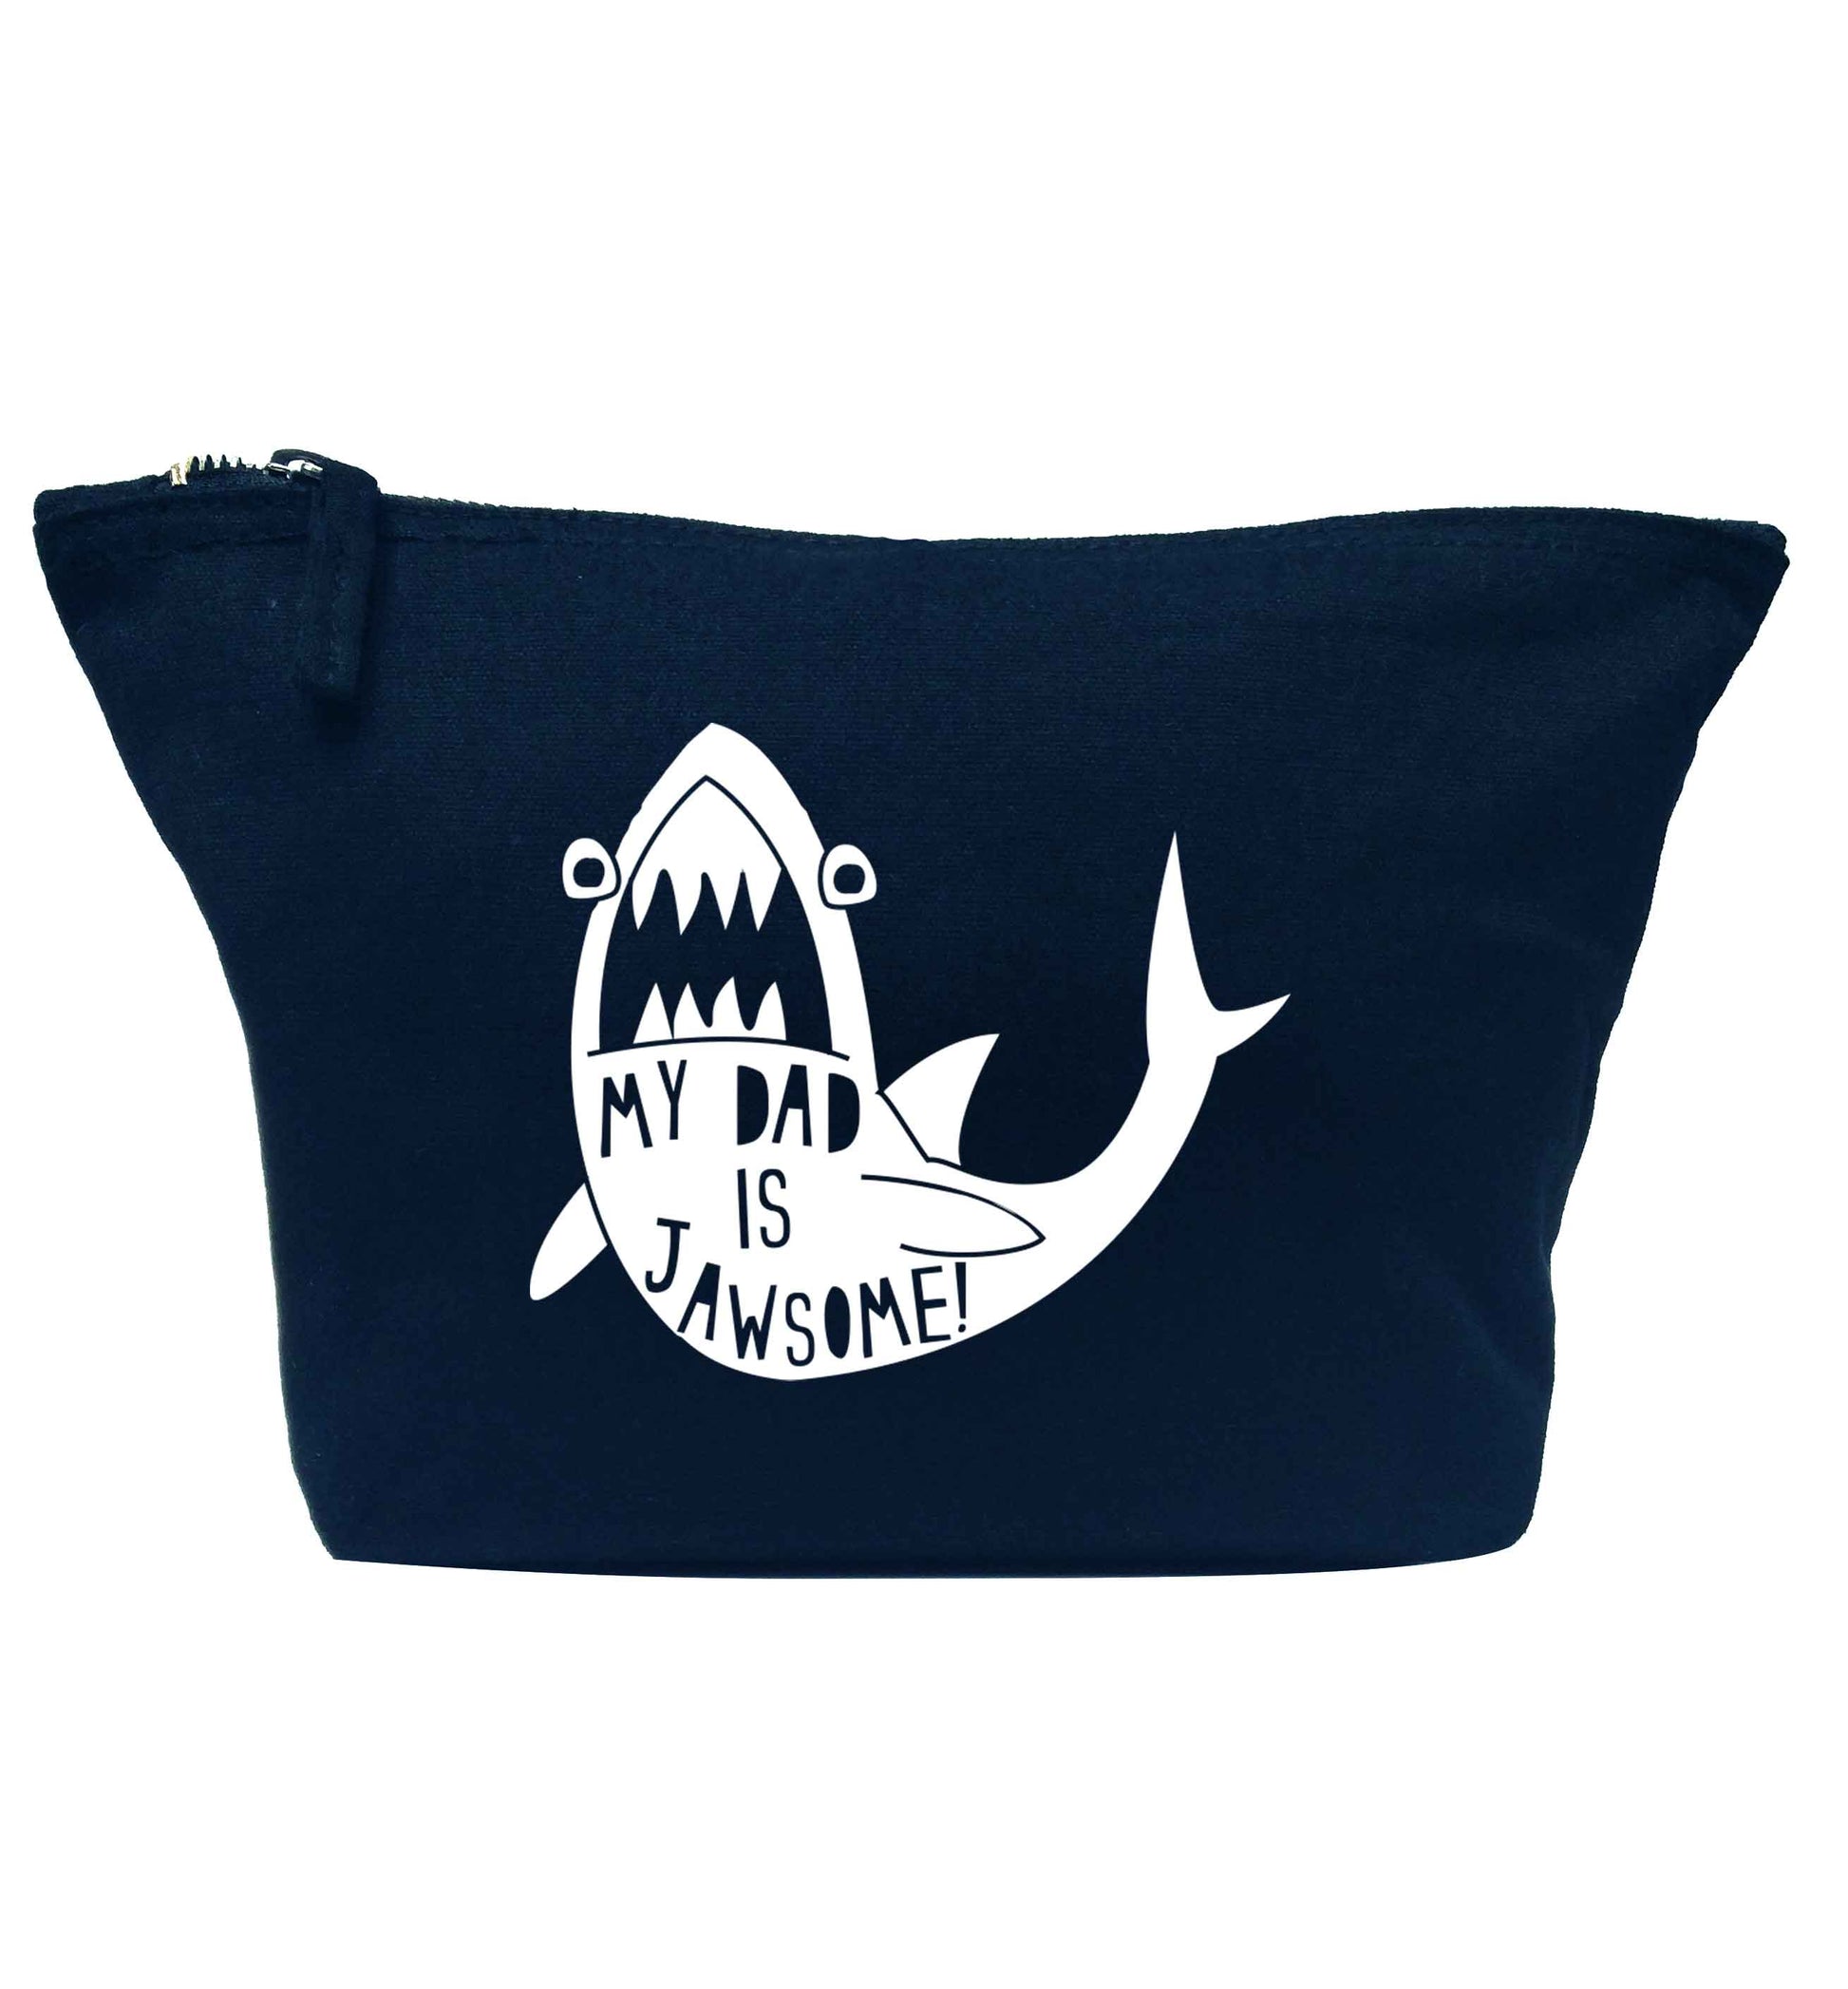 My Dad is jawsome navy makeup bag